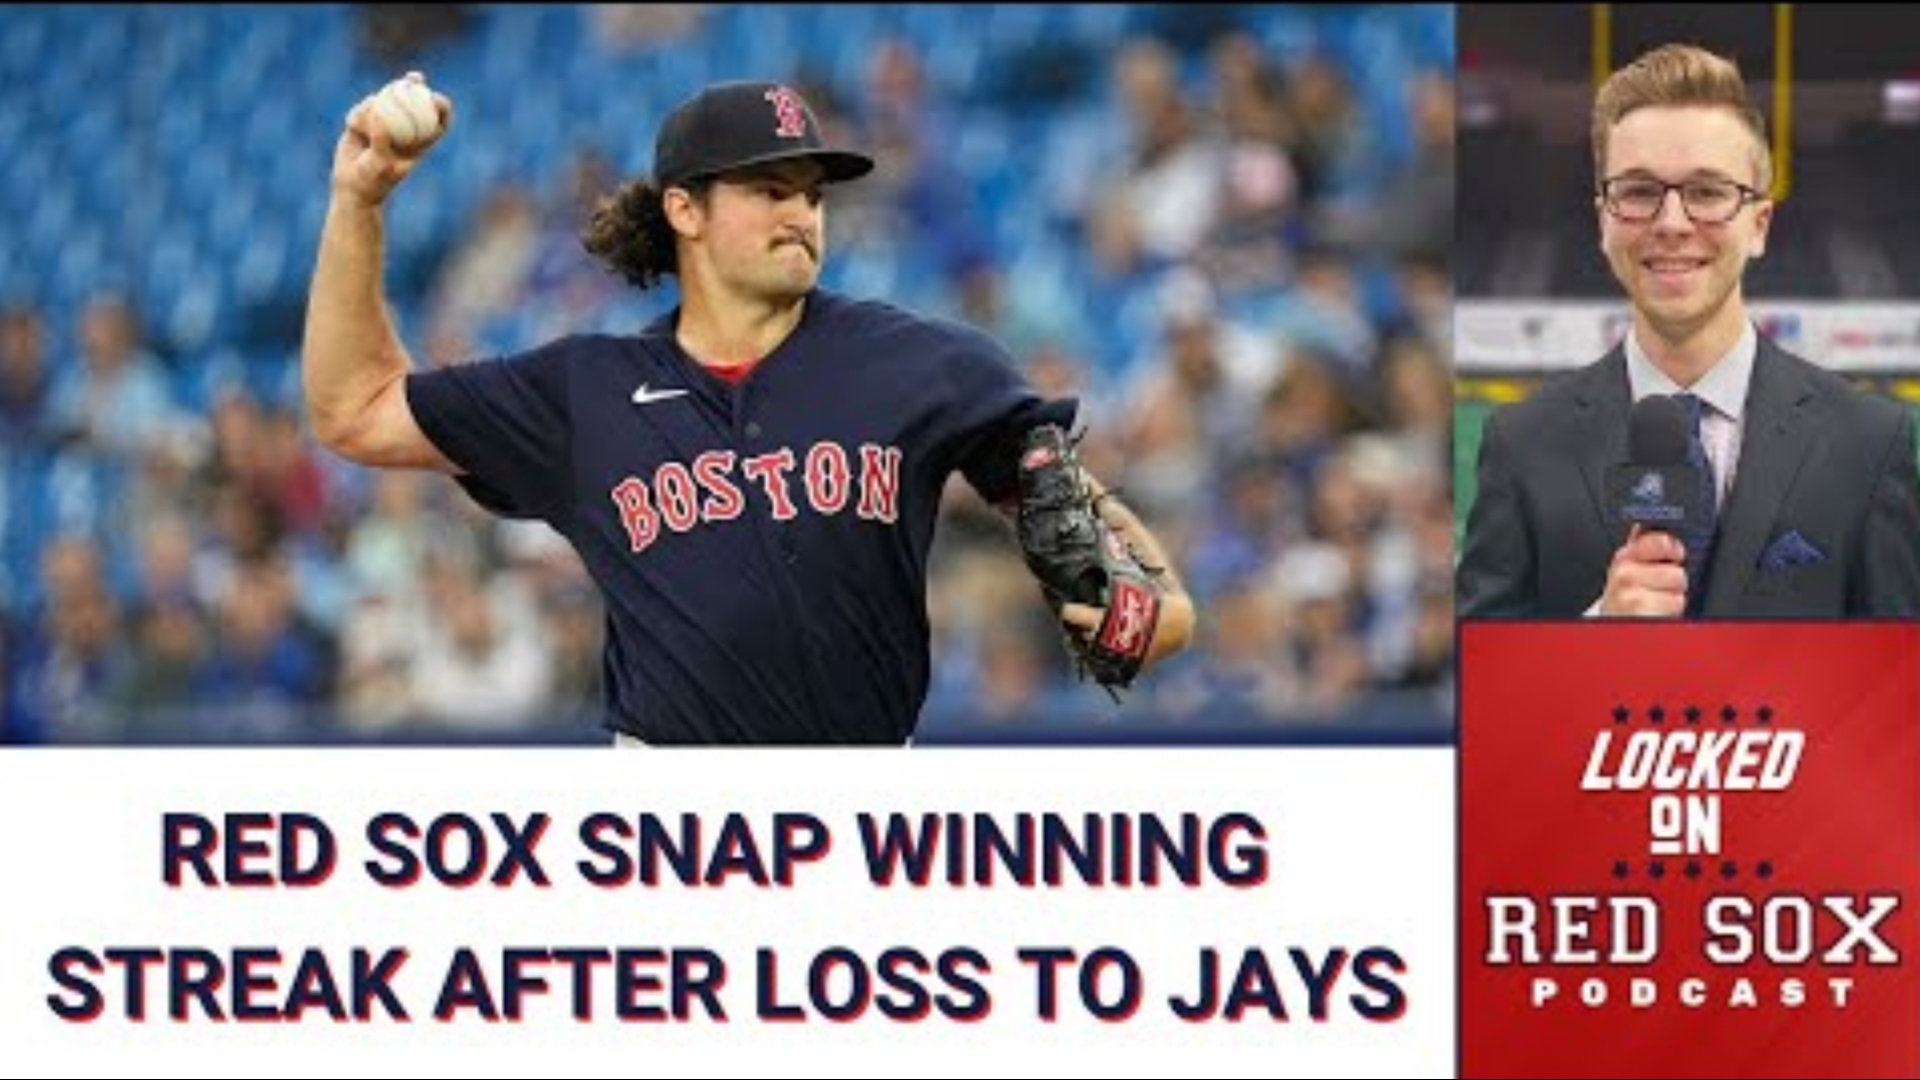 On Monday night, the Red Sox snapped their 7-game winning streak after a 7-2 loss to their division rival, the Toronto Blue Jays in Game 1 of a 3-game series.